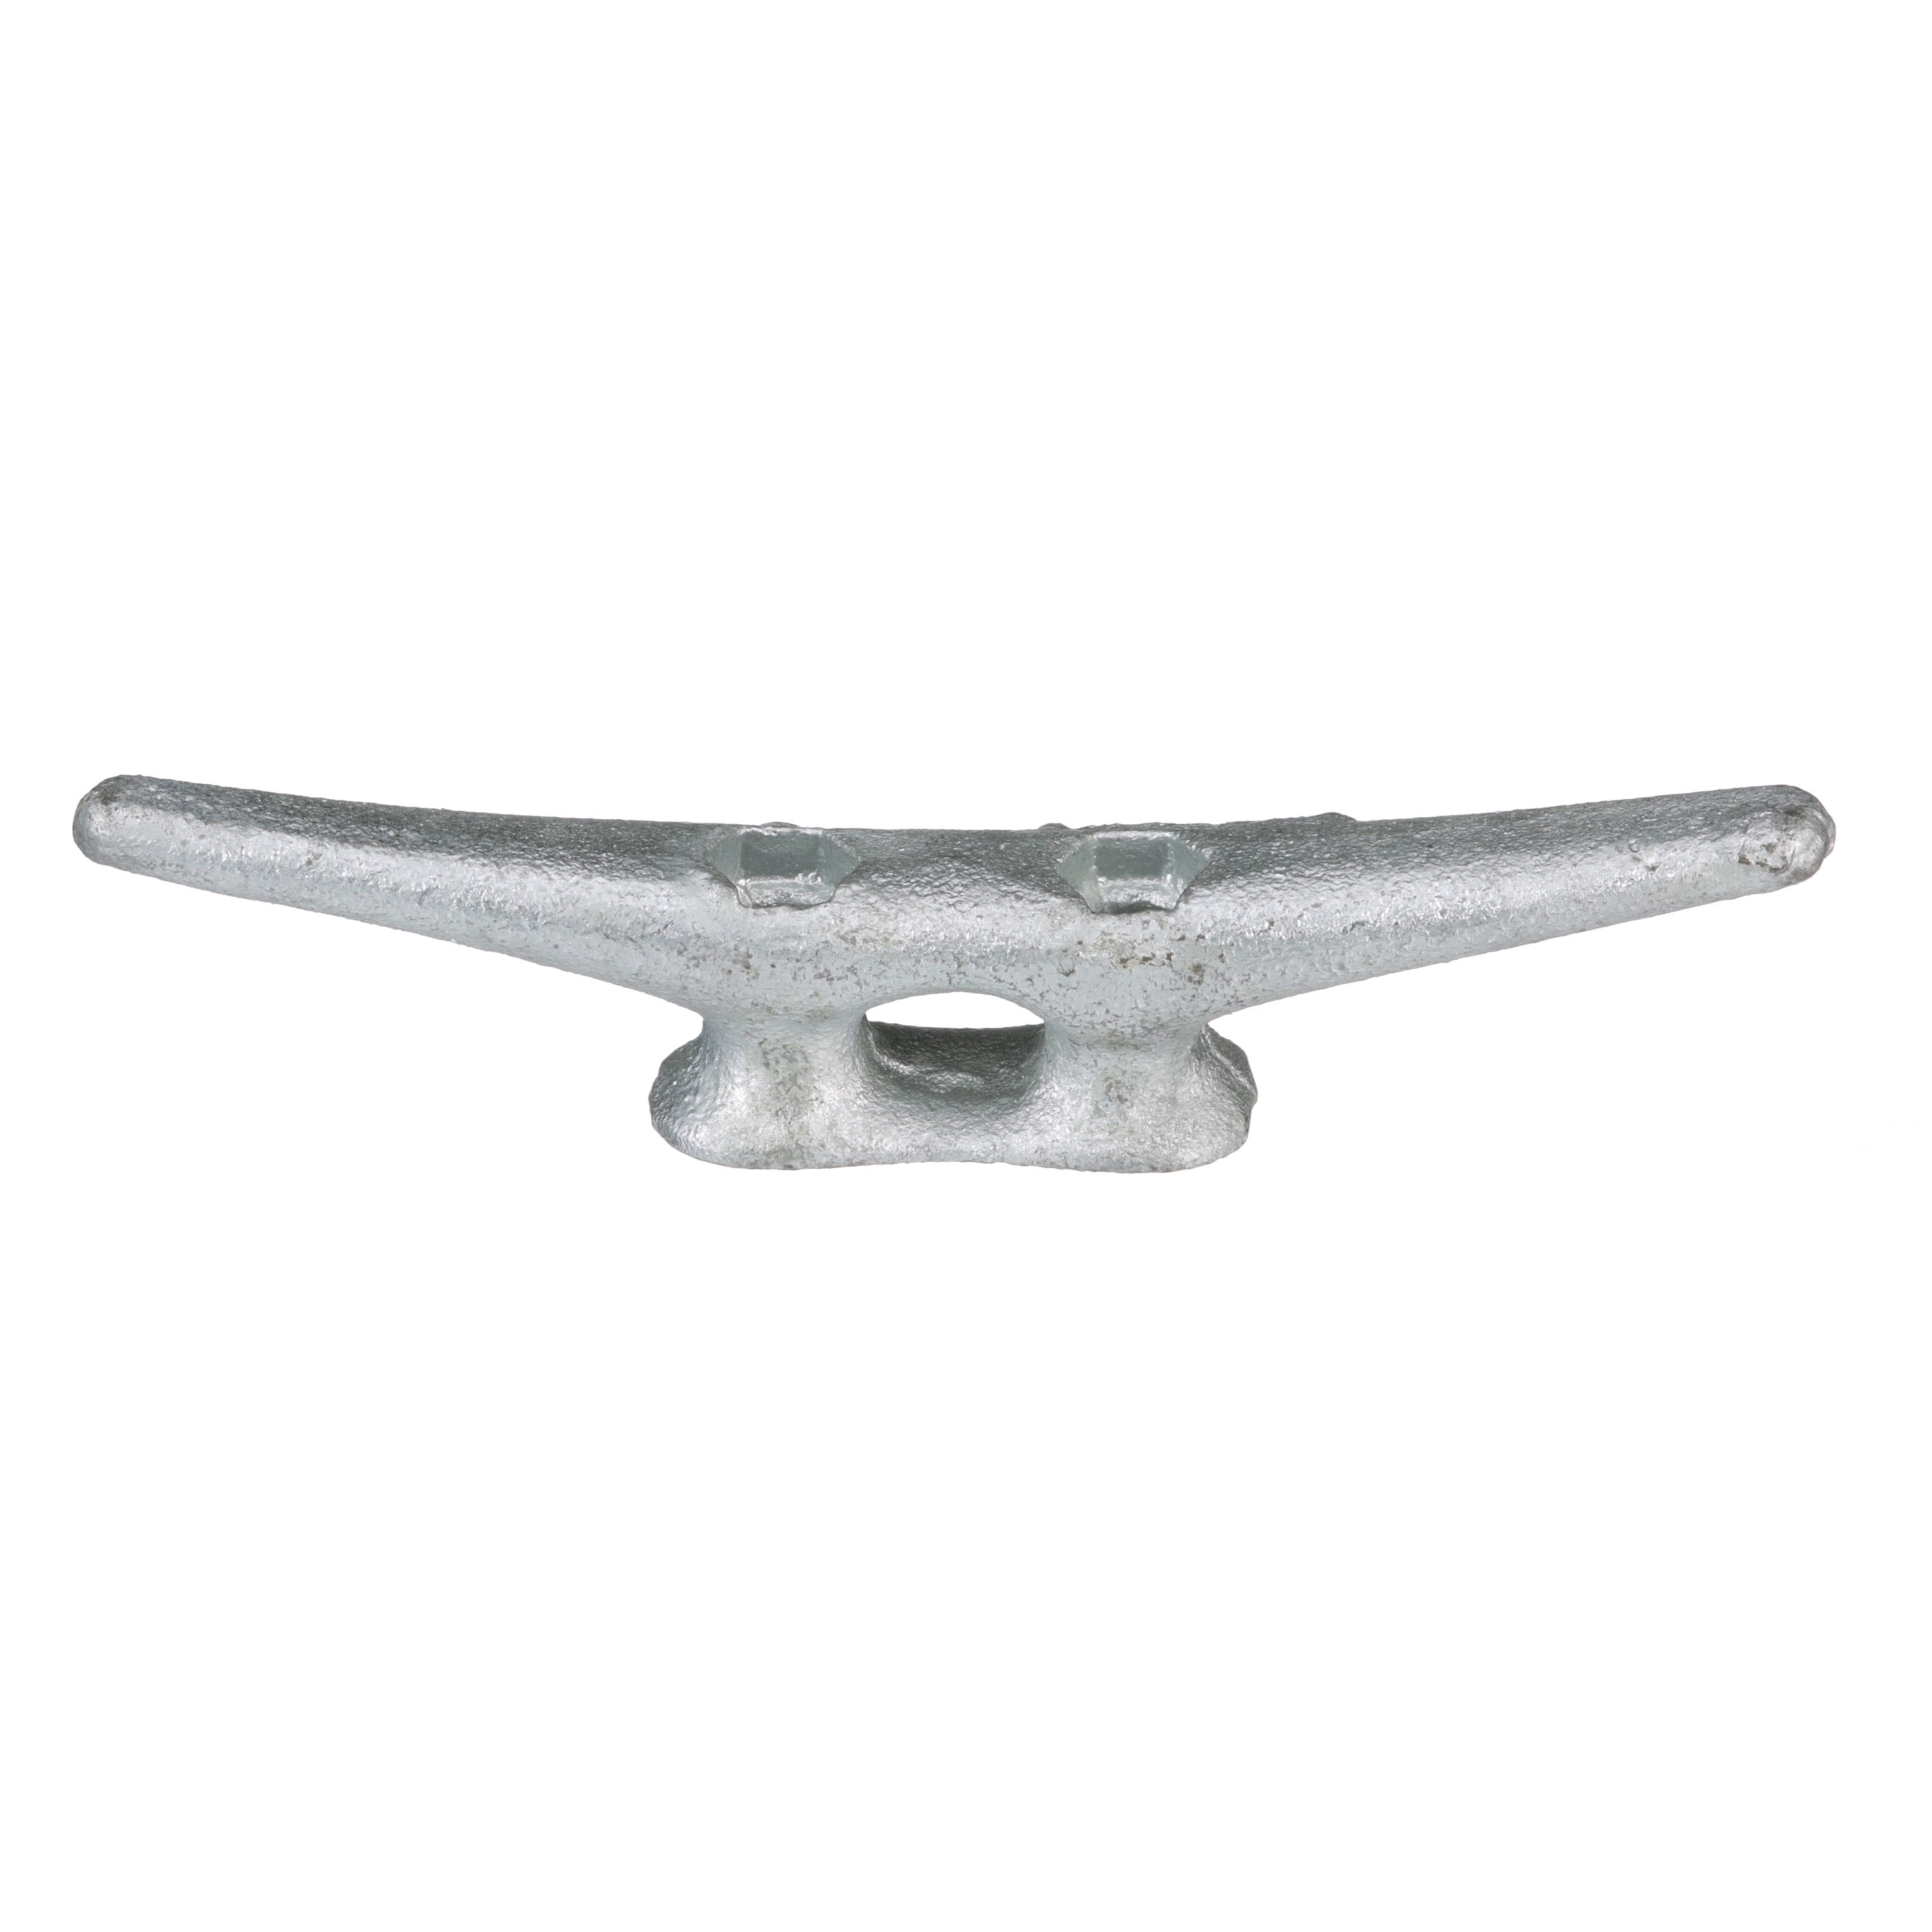 MARINE DOCK CLEAT 5 GALVANIZED OPEN BASE BOAT 50 PACK